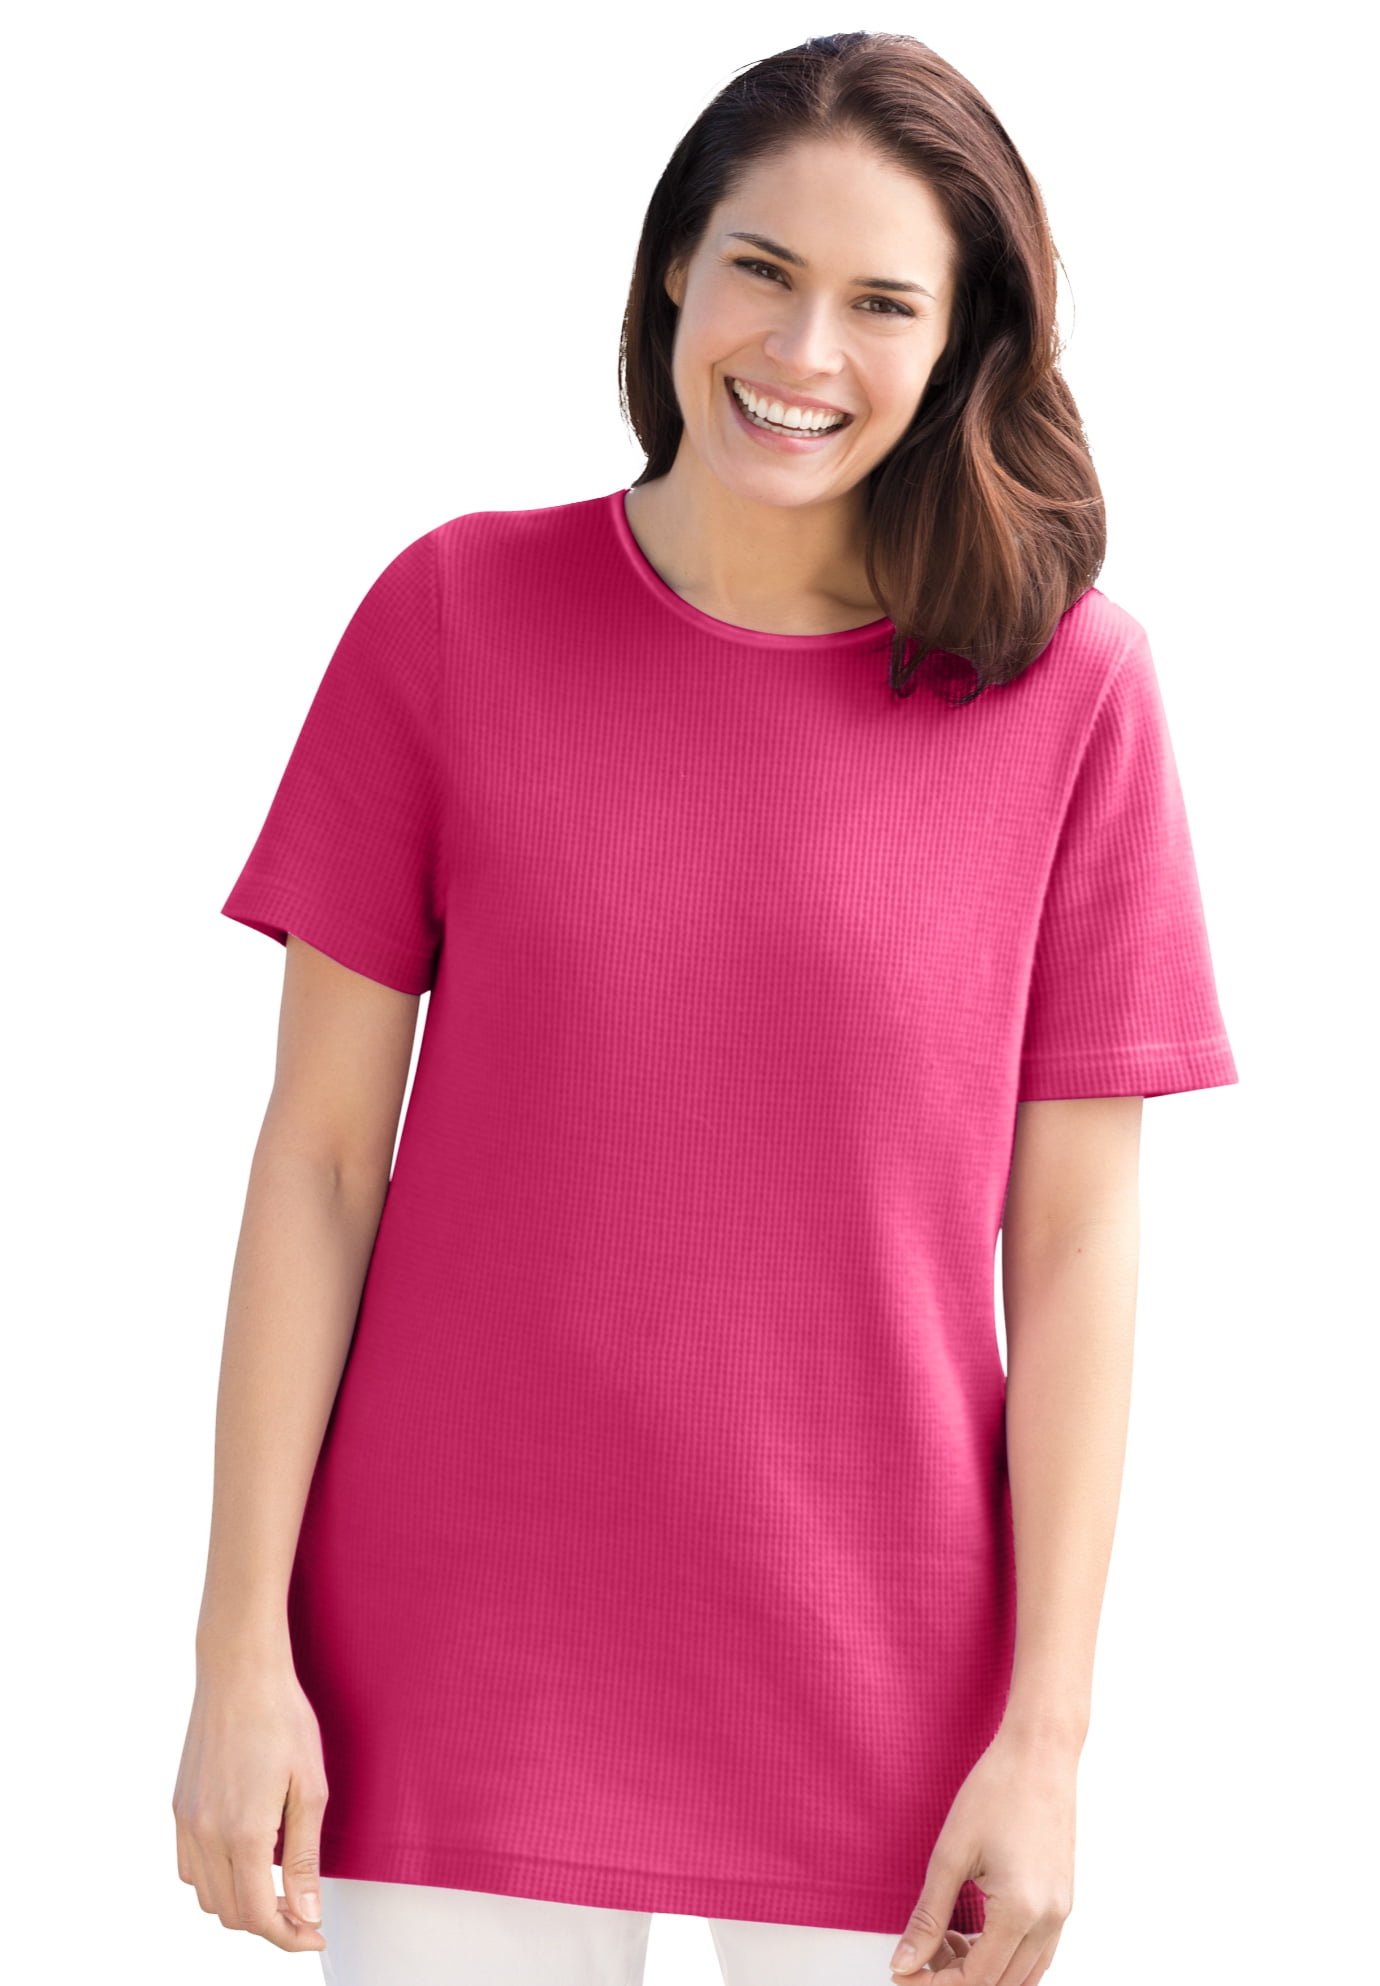 Woman Within Womens Plus Size Satin-Trimmed Crewneck Thermal Tee